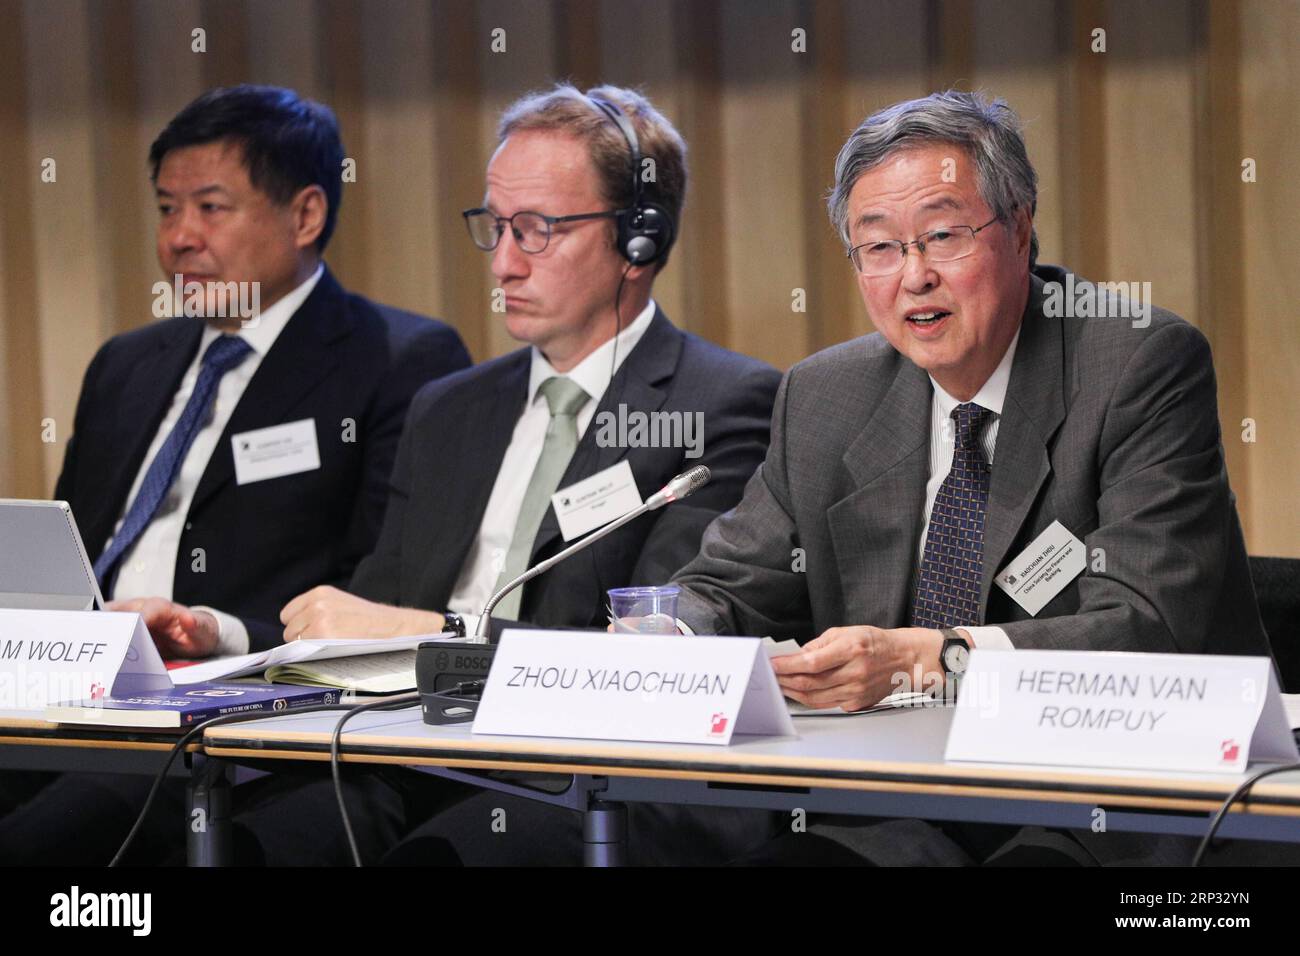 (180918) -- BRUSSELS, Sept. 18, 2018 -- Zhou Xiaochuan (R), president of the China Society for Finance and Banking, who also serves as an adviser of China Center for International Economic Exchanges, addresses the seminar Perils and potential: China-US-EU trade relations held in Brussels, Belgium, on Sept. 17, 2018. Amid increasing tensions of trade wars worldwide, around 100 leading scholars from China and Europe gathered here in the headquarters of Belgian think tank Bruegel Monday, calling on China and Europe to reduce misunderstanding via open and fair discussions on all levels. ) (hy) BEL Stock Photo